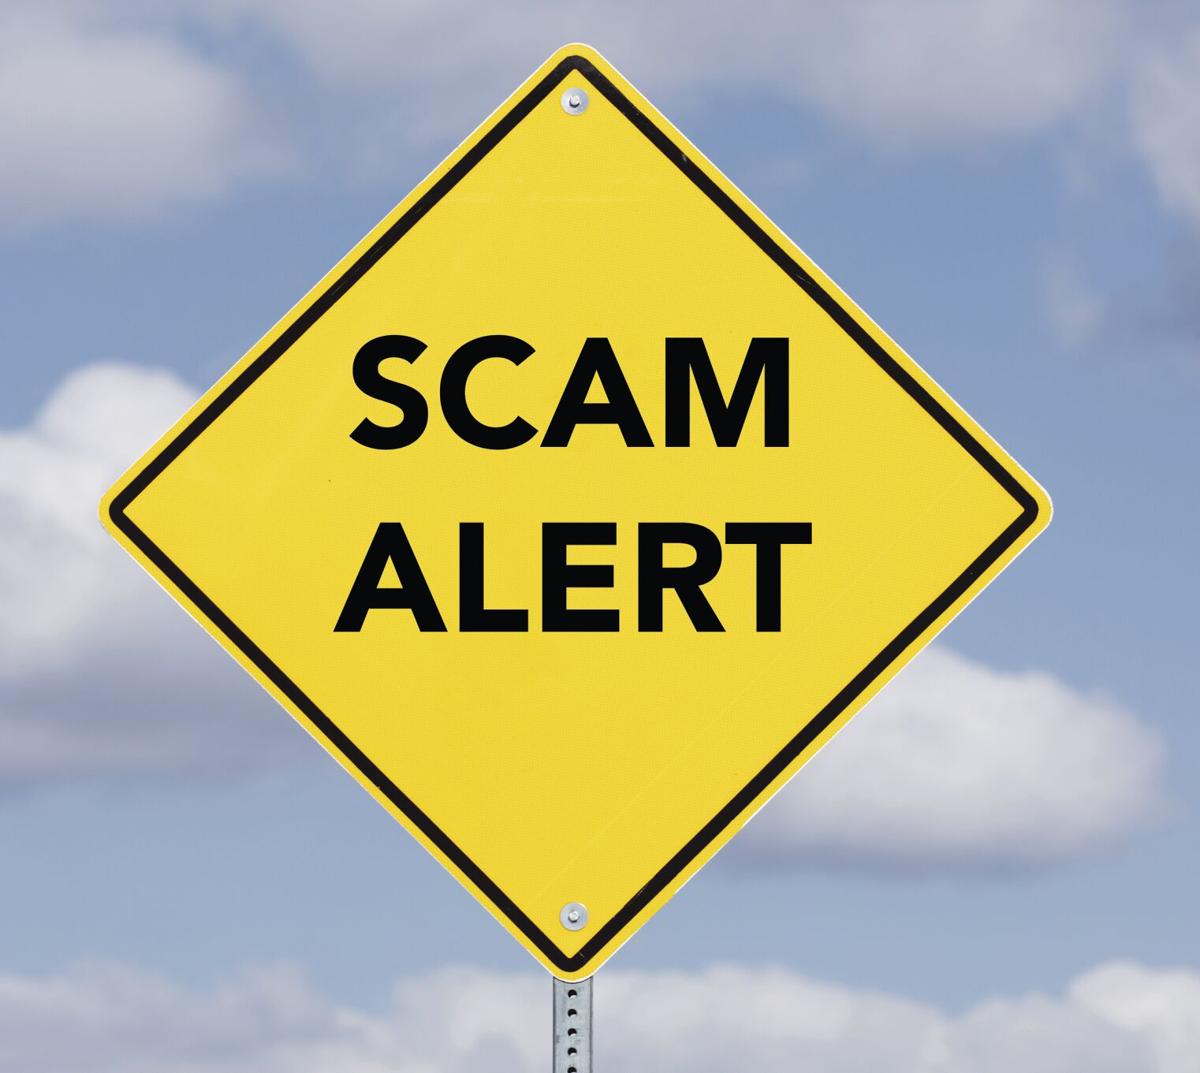 Seniors Fraud in Prince Edward County - Tell us what you think 